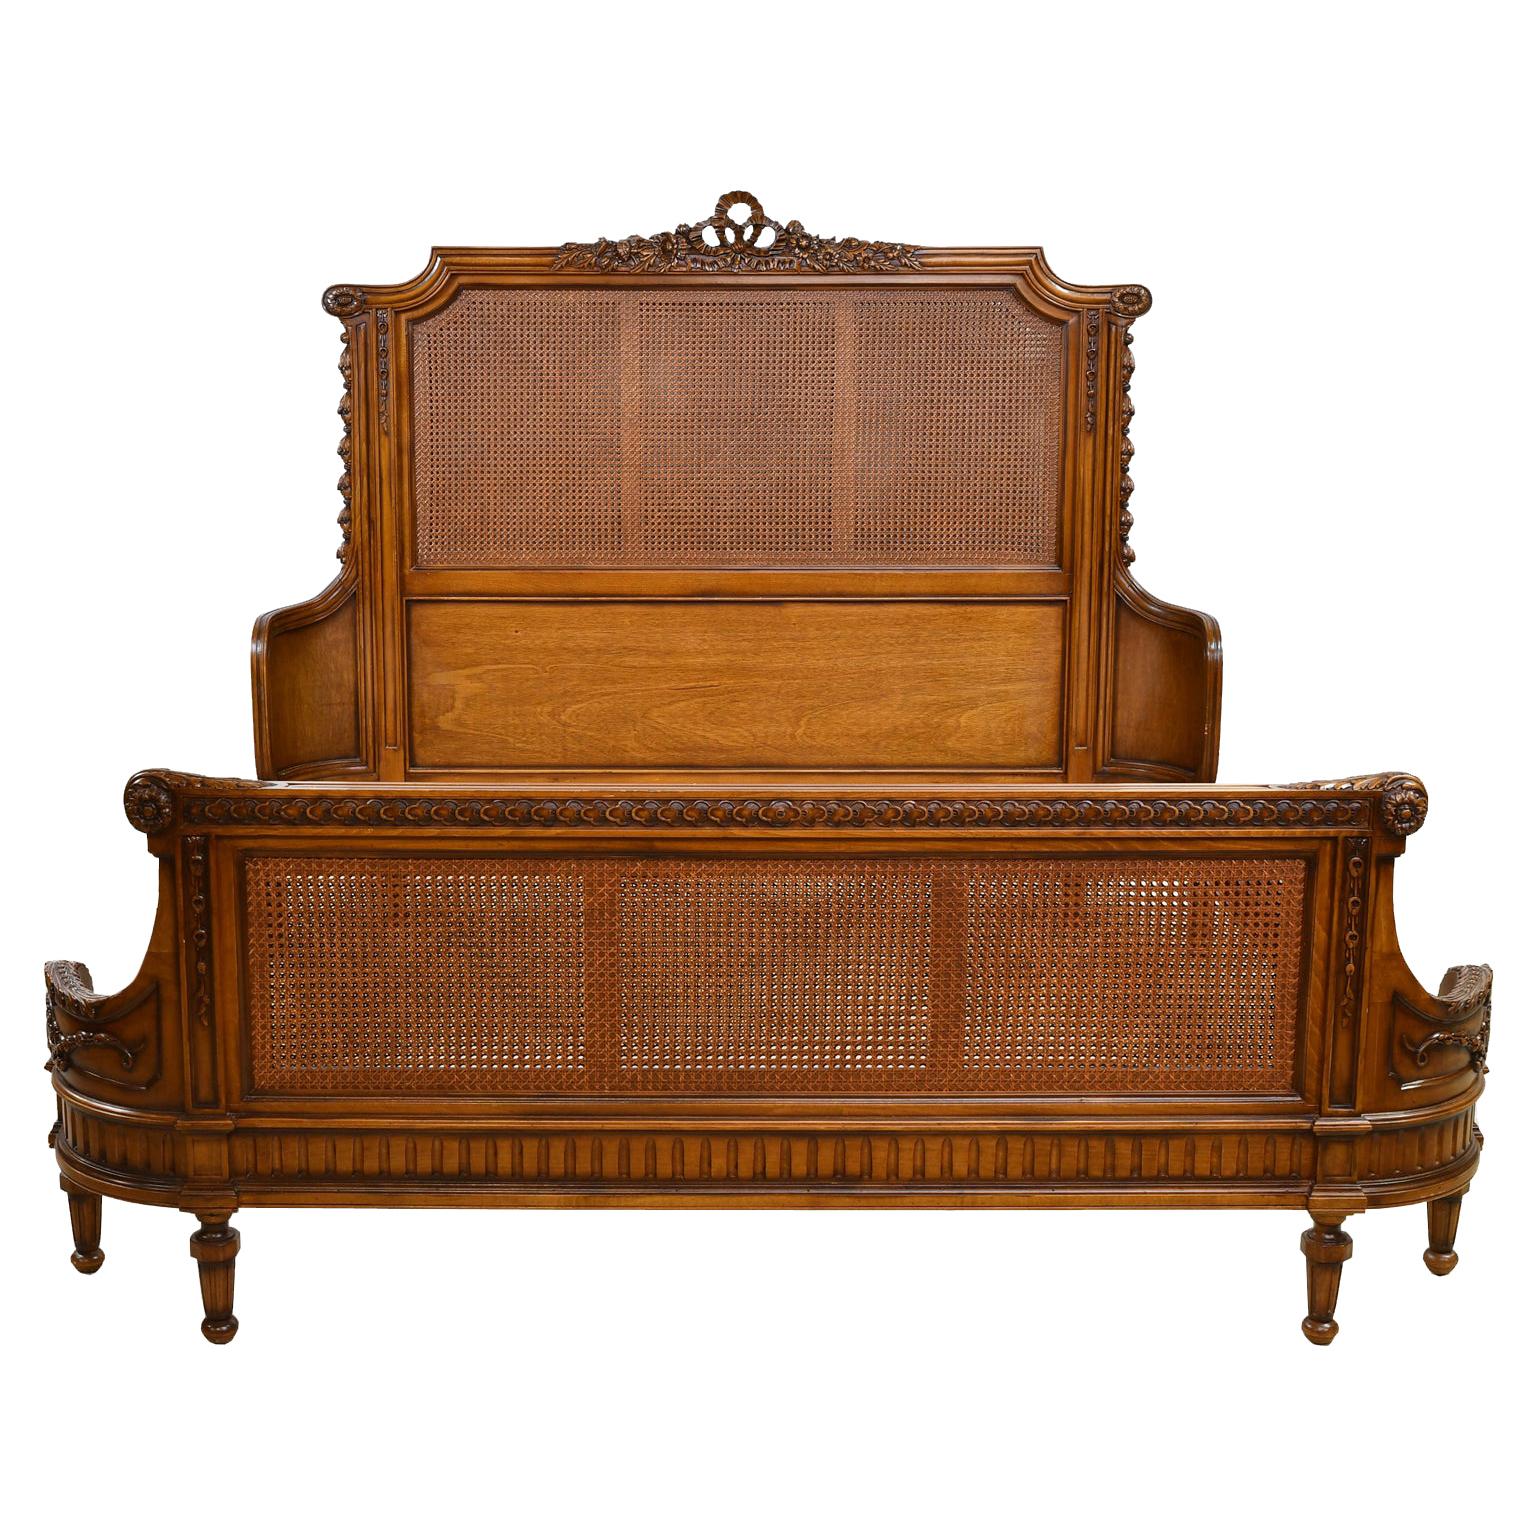 Louis XVI Style King Size Bed with Walnut-Colored Wood Frame and Woven Caning